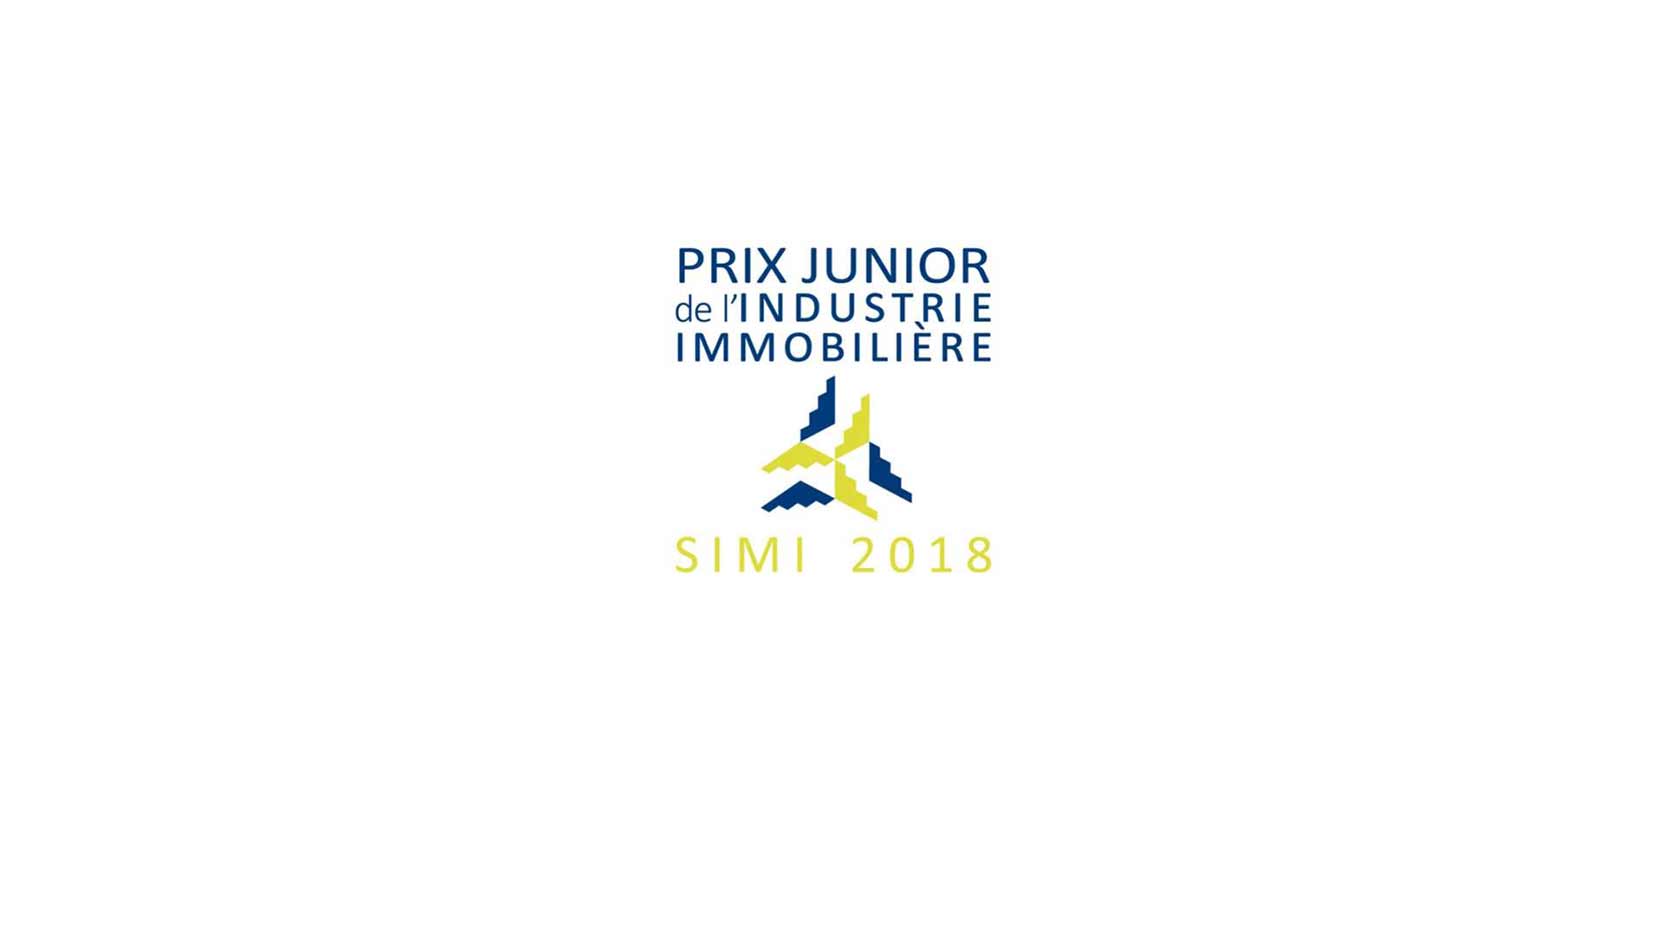 All you need to know about the Prix Junior de l’Industrie Immobilière 2018, chaired by GA Smart Building